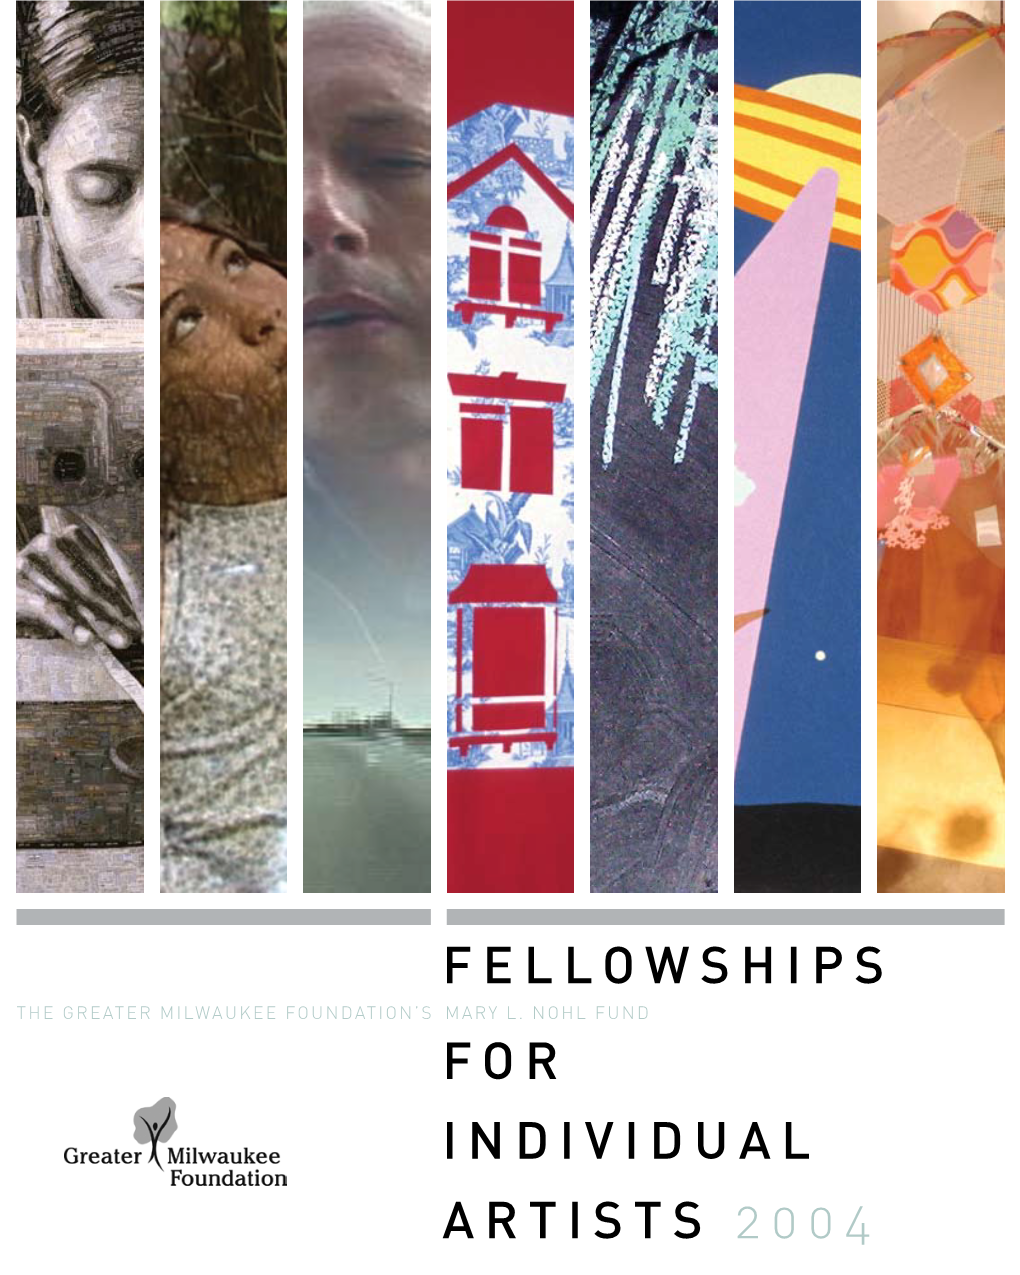 Fellowships for Individual Artists 2004